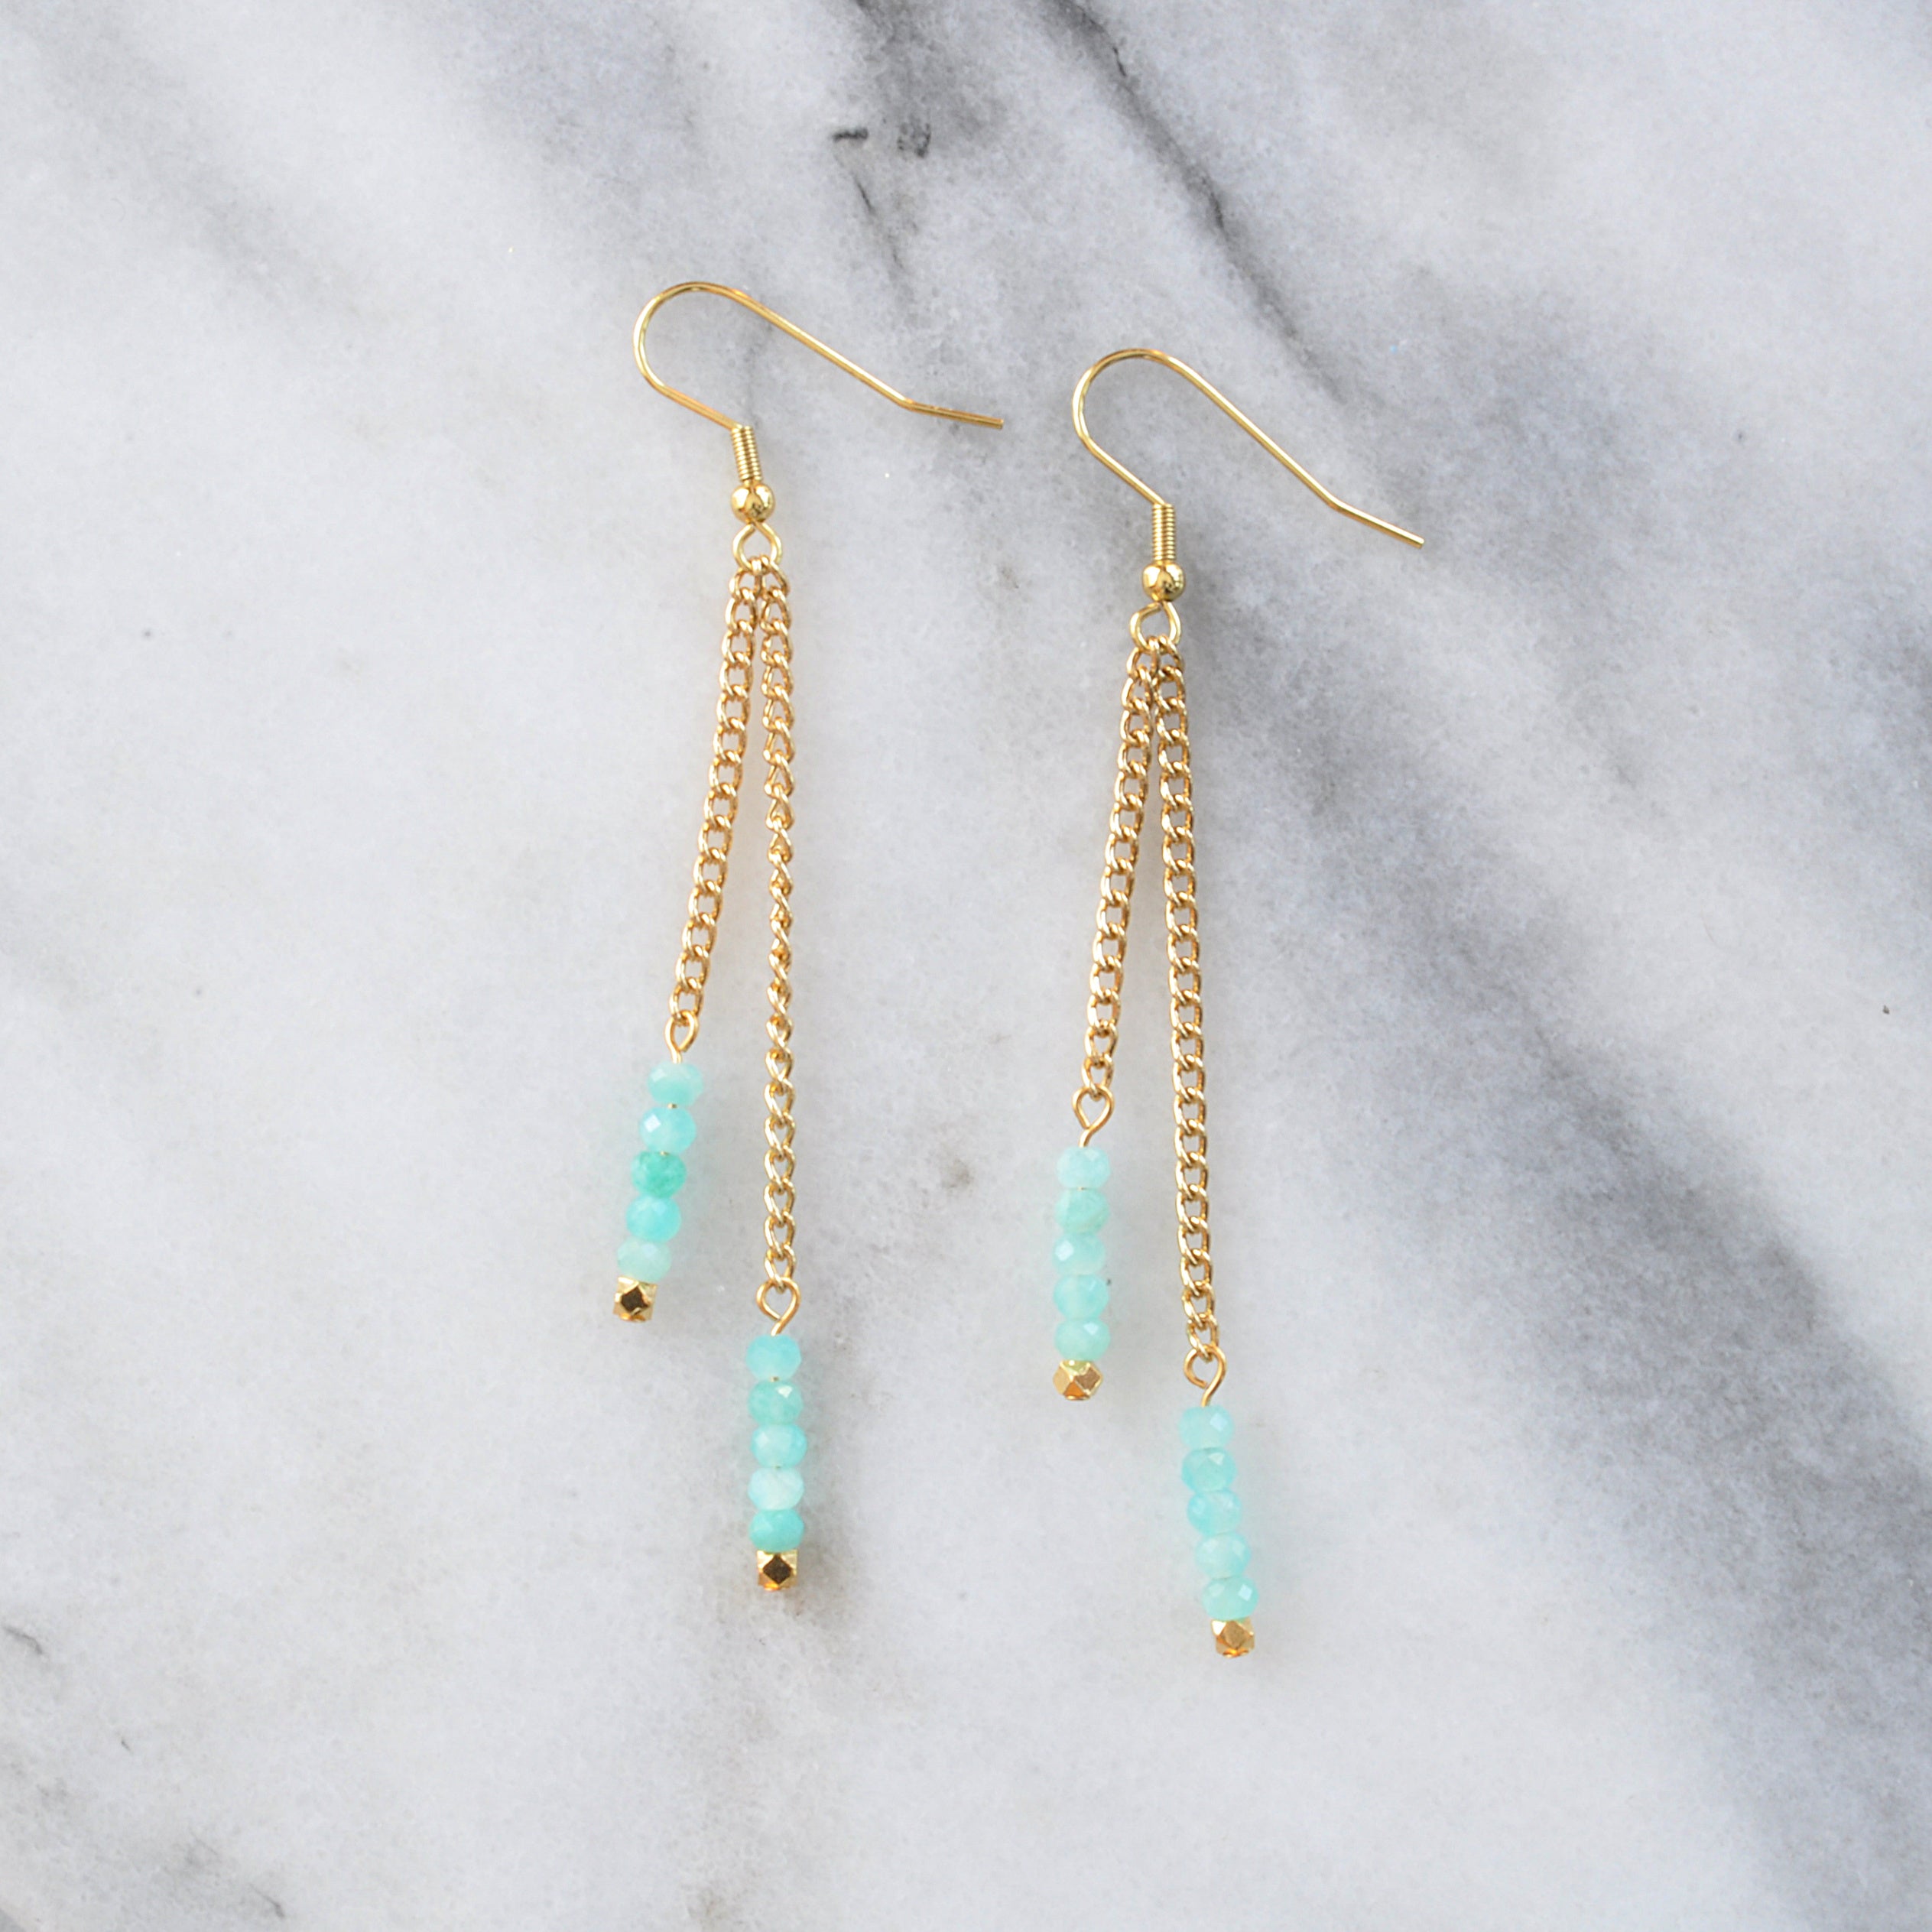 Libby & Smee Gemstone Gold chain Earrings available with Amazonite beads